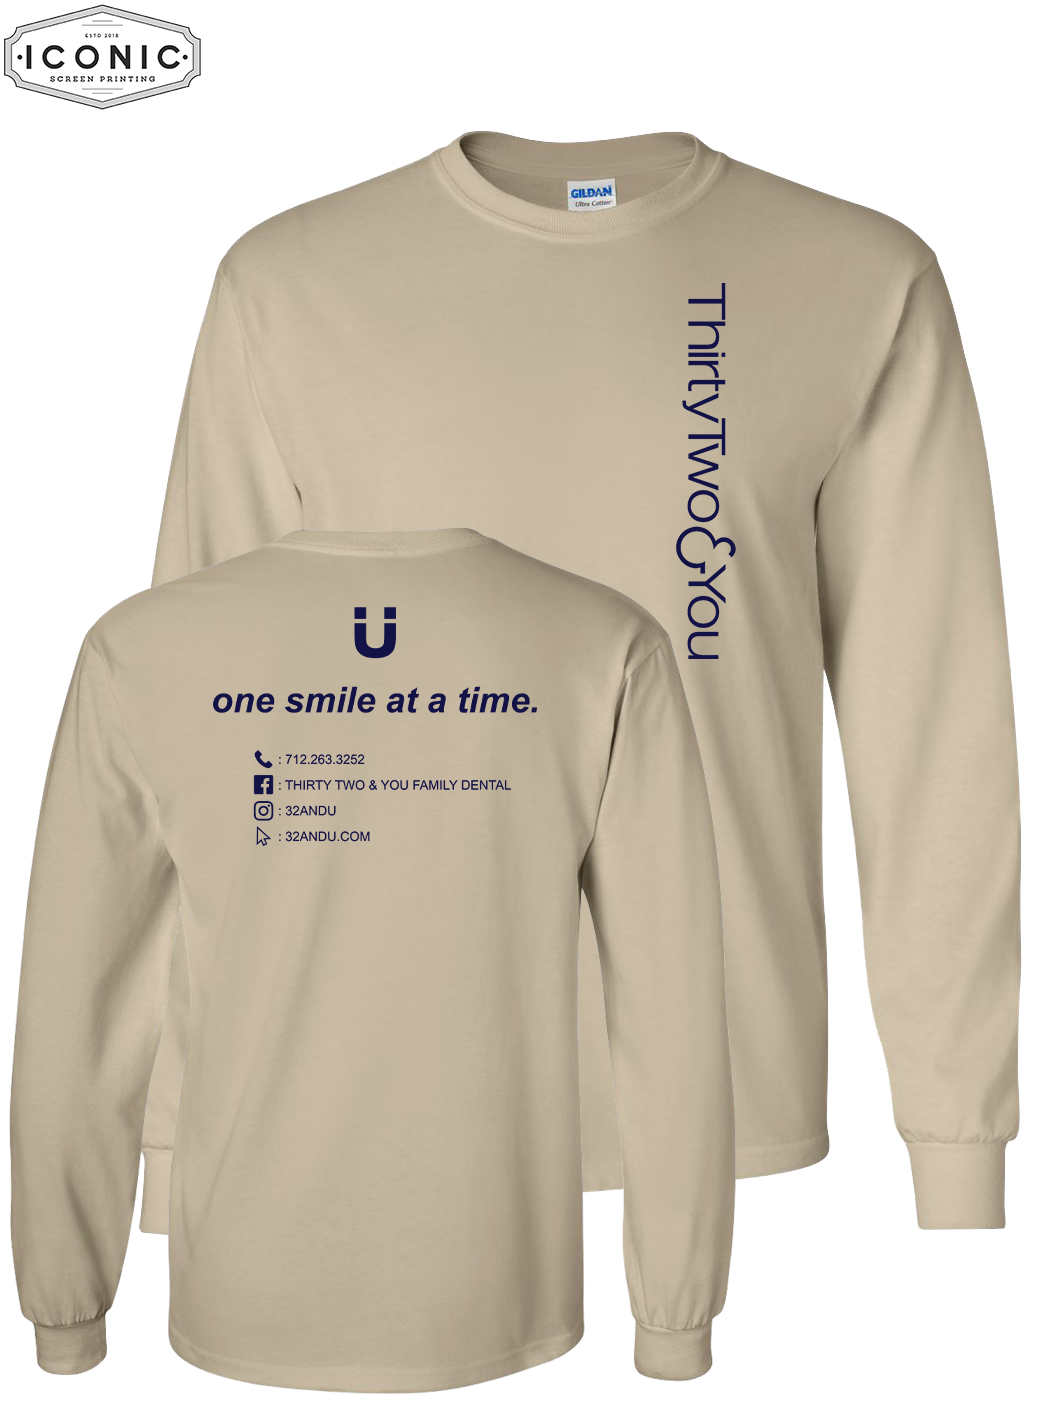 Thirty Two & You - D2 - Ultra Cotton Long Sleeve